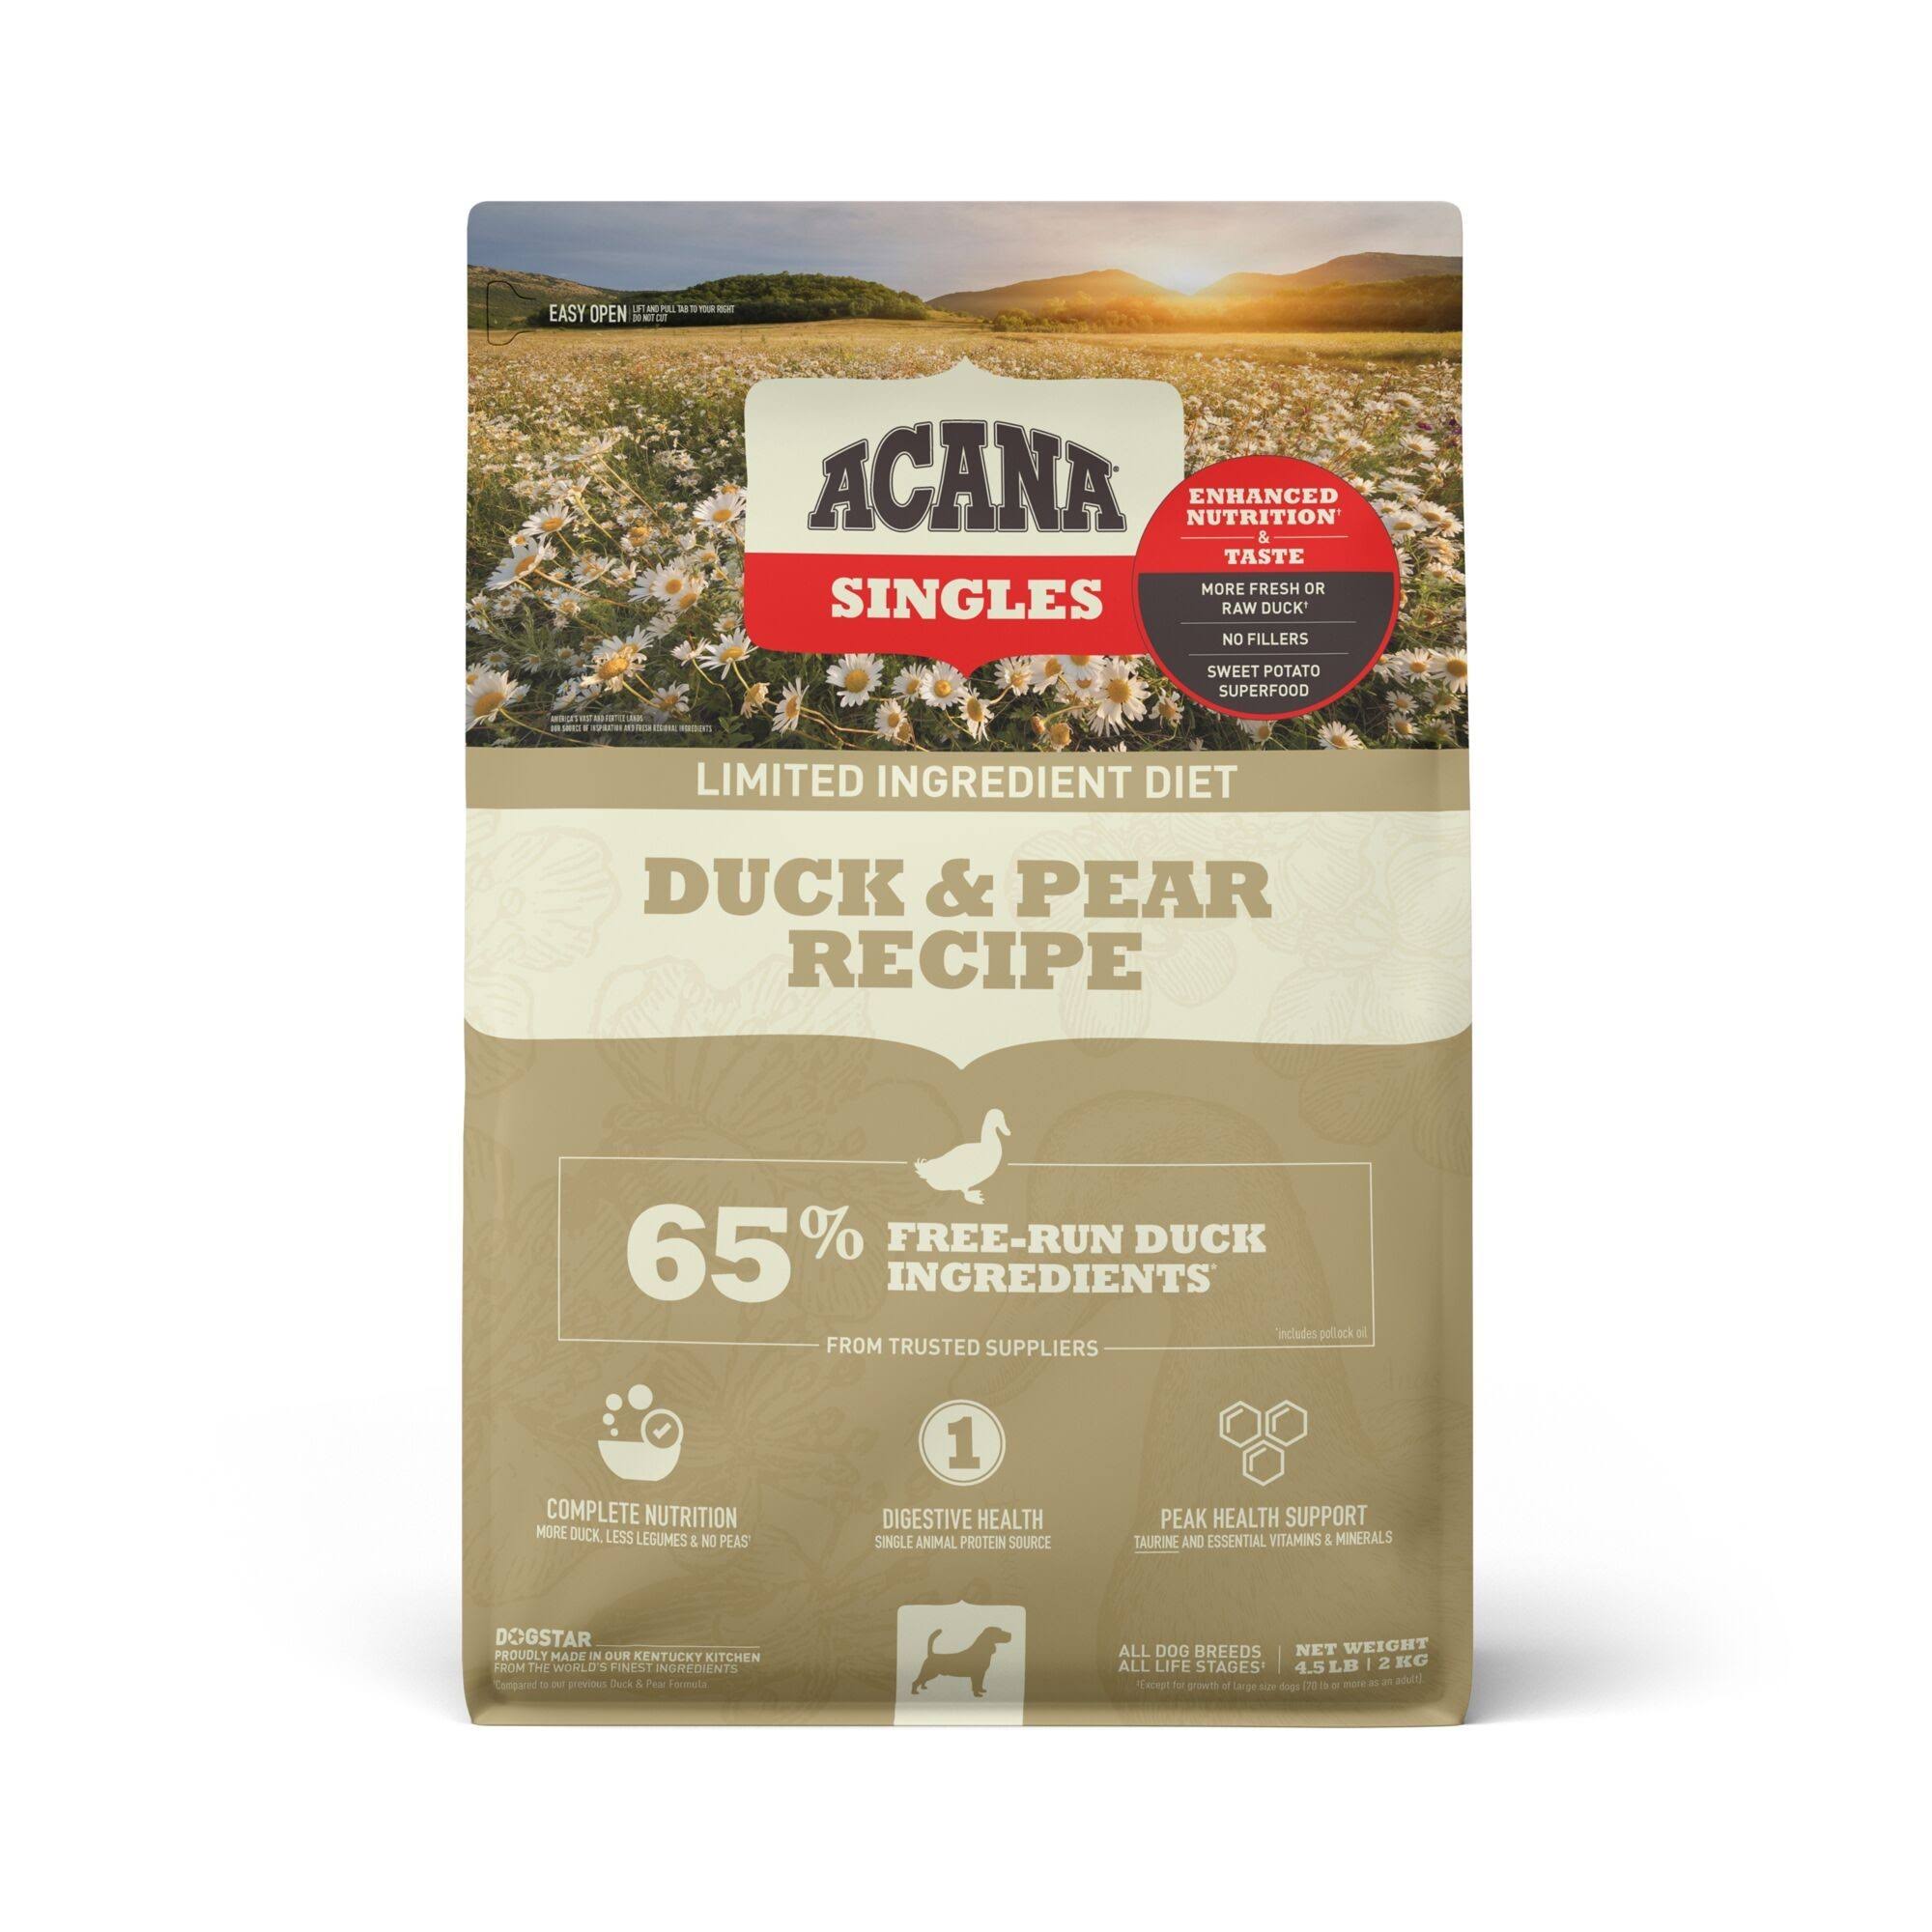 Acana Singles Limited Ingredient Diet Duck & Pear Recipe Grain-Free Dry Dog Food 25 LB